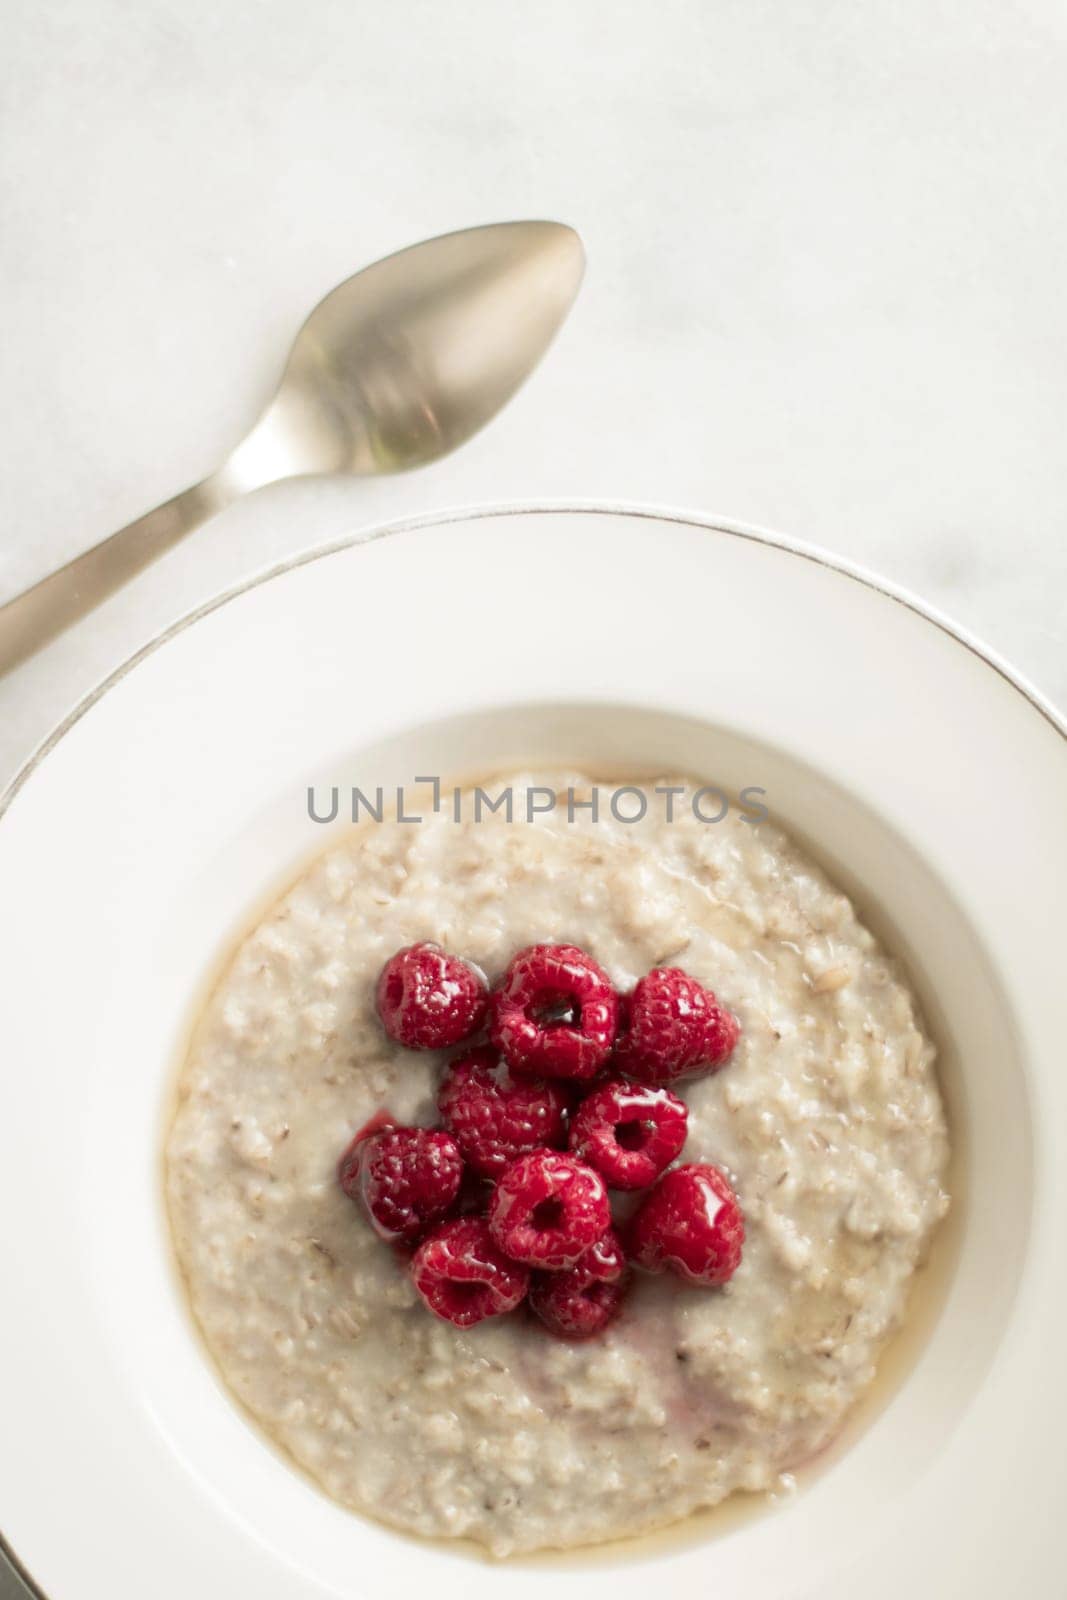 homemade rustic healthy breakfast styled concept - oatmeal with raspberries and honey, elegant visuals